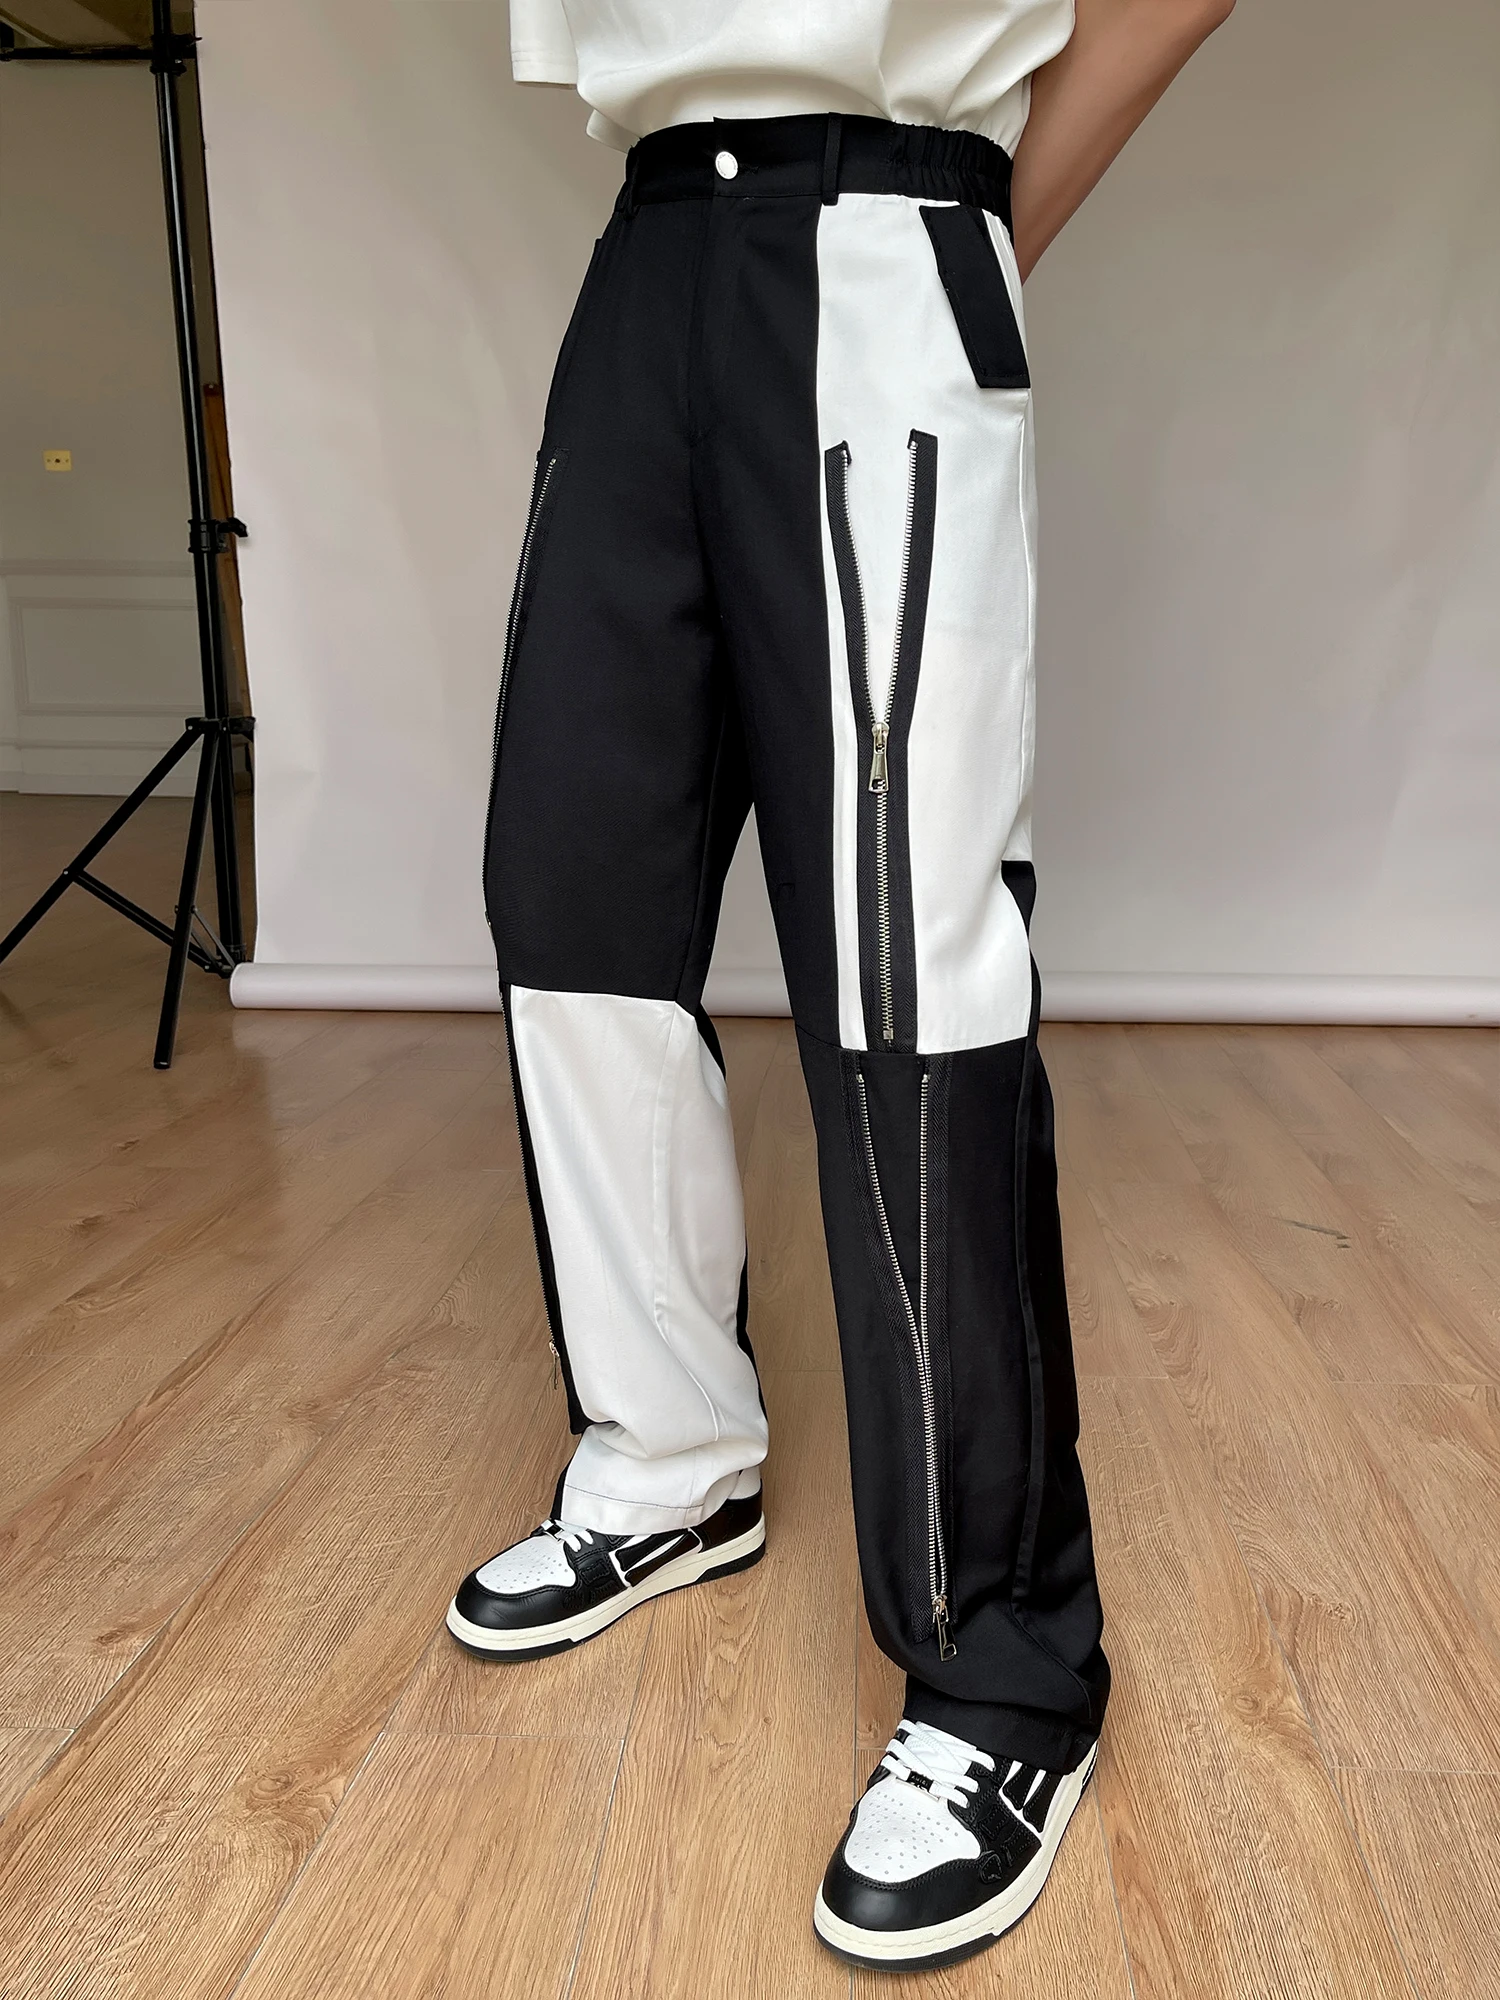 

27-46 New 2022 Men Clothing GD Hair Stylist Design Neutral Black and White Stitched Zip Casual Pants Plus Size Singer Costumes